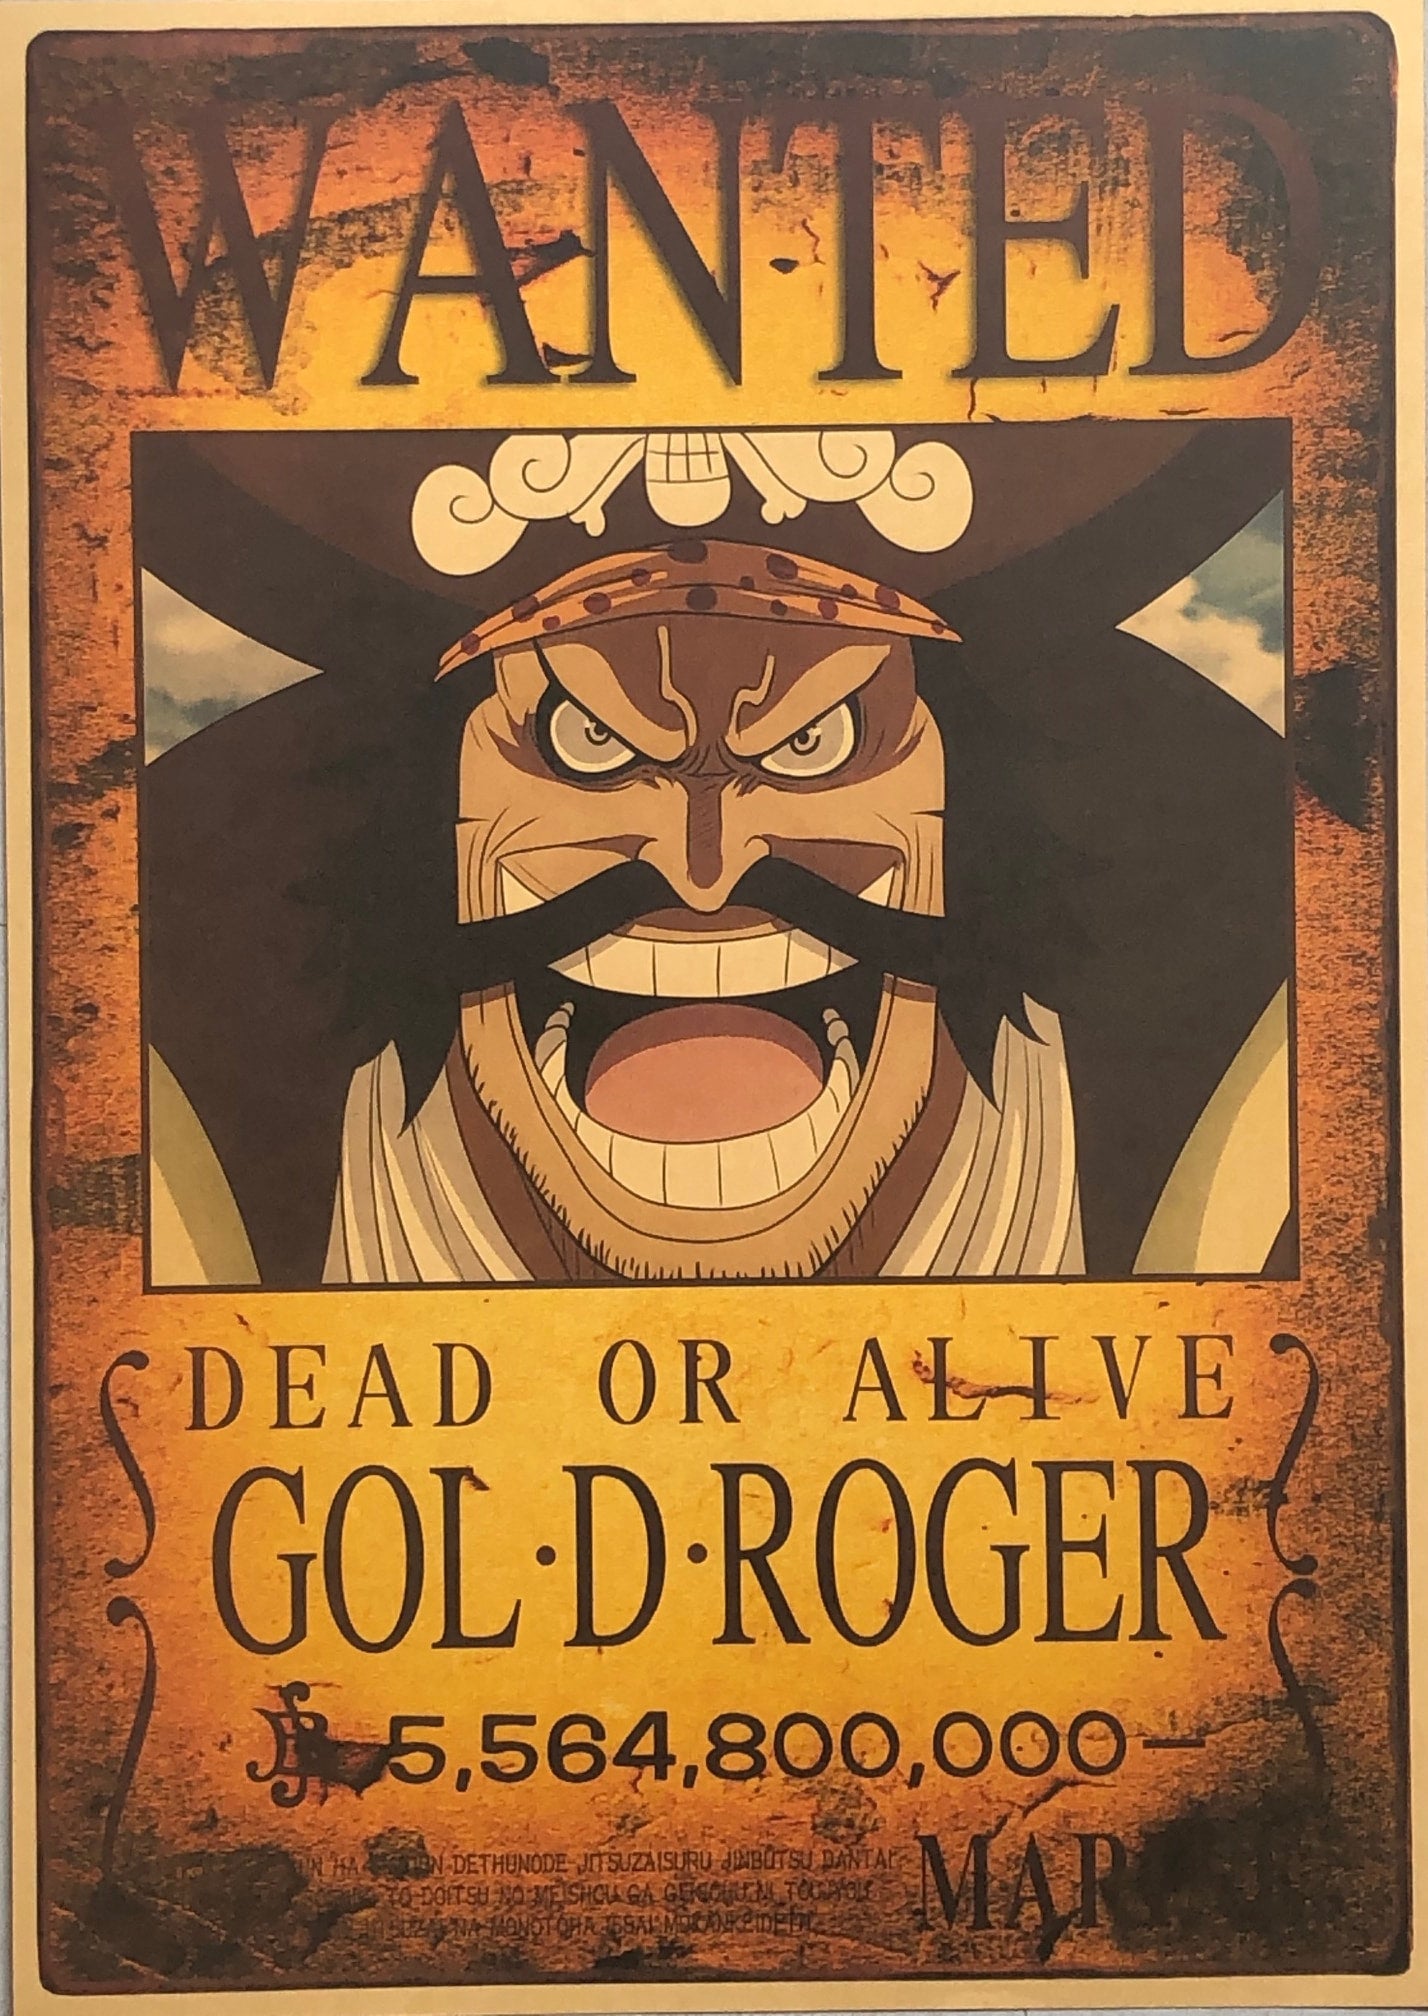 16pcs A4 Size Updated Wanted Bounty Wall Poster (One Piece Anime) Pirate  crew Wanted Poster Set - One Piece Poster |